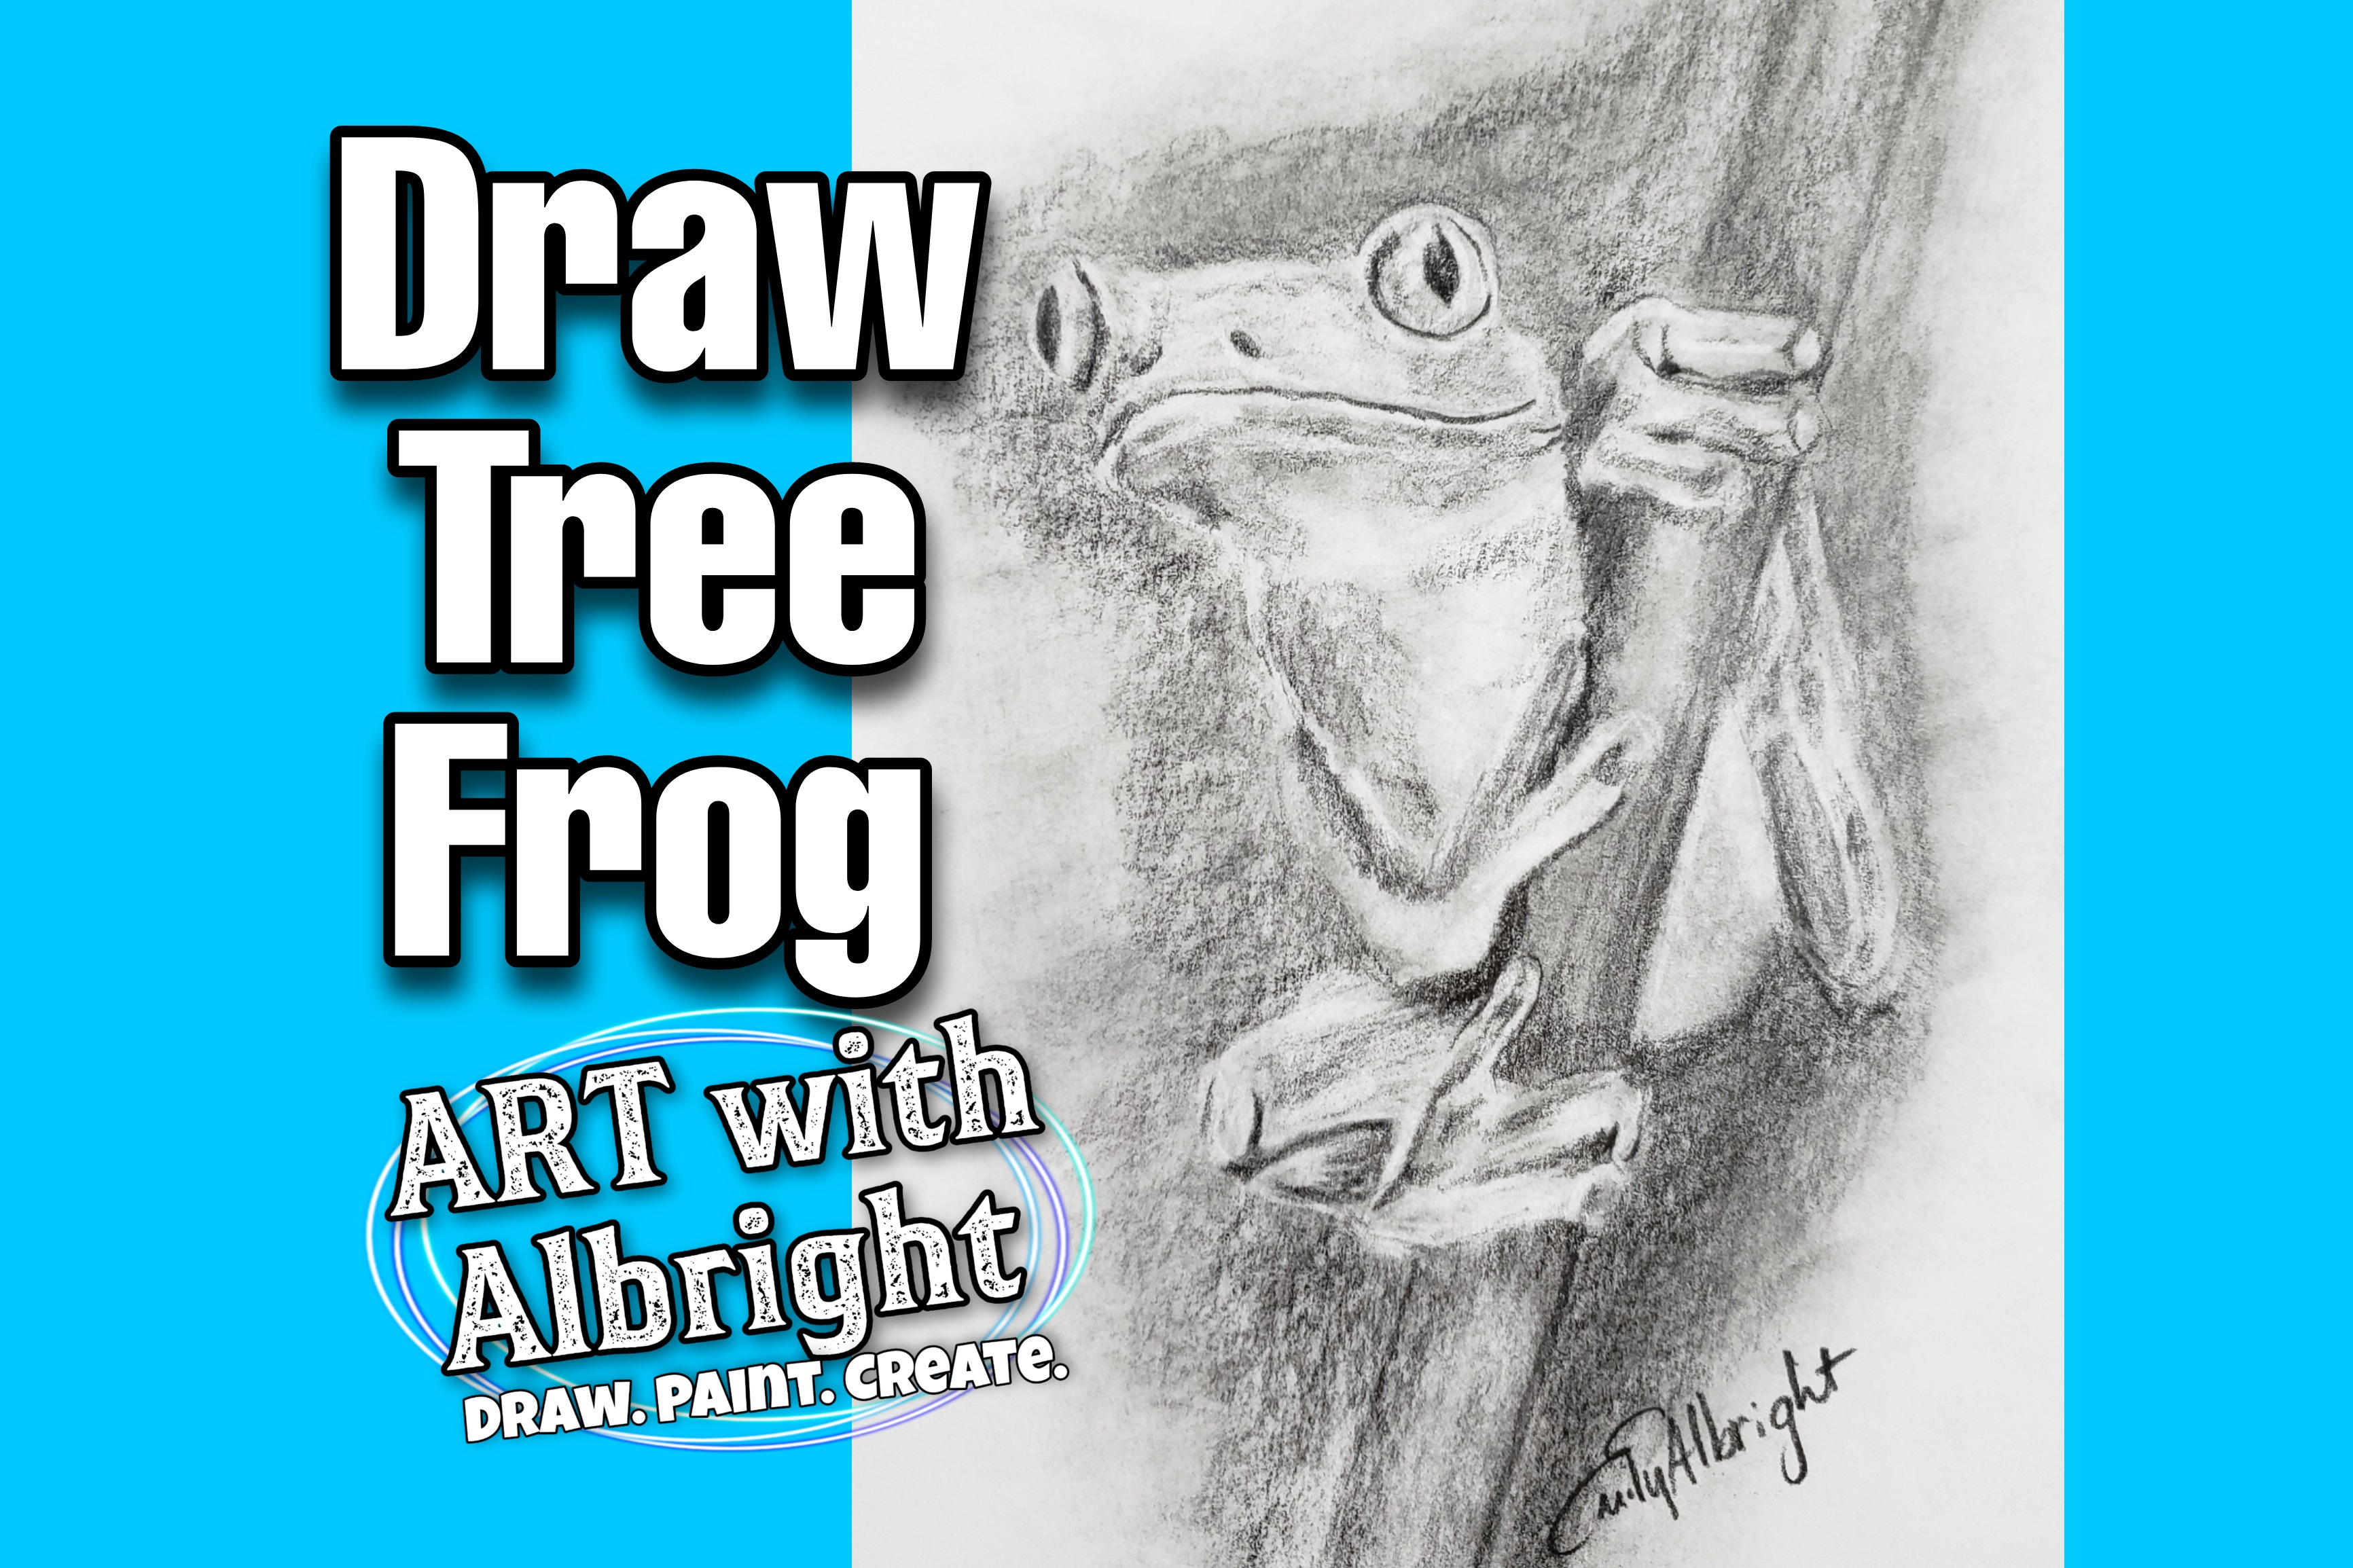 How to draw a frog, draw a frog - YouTube